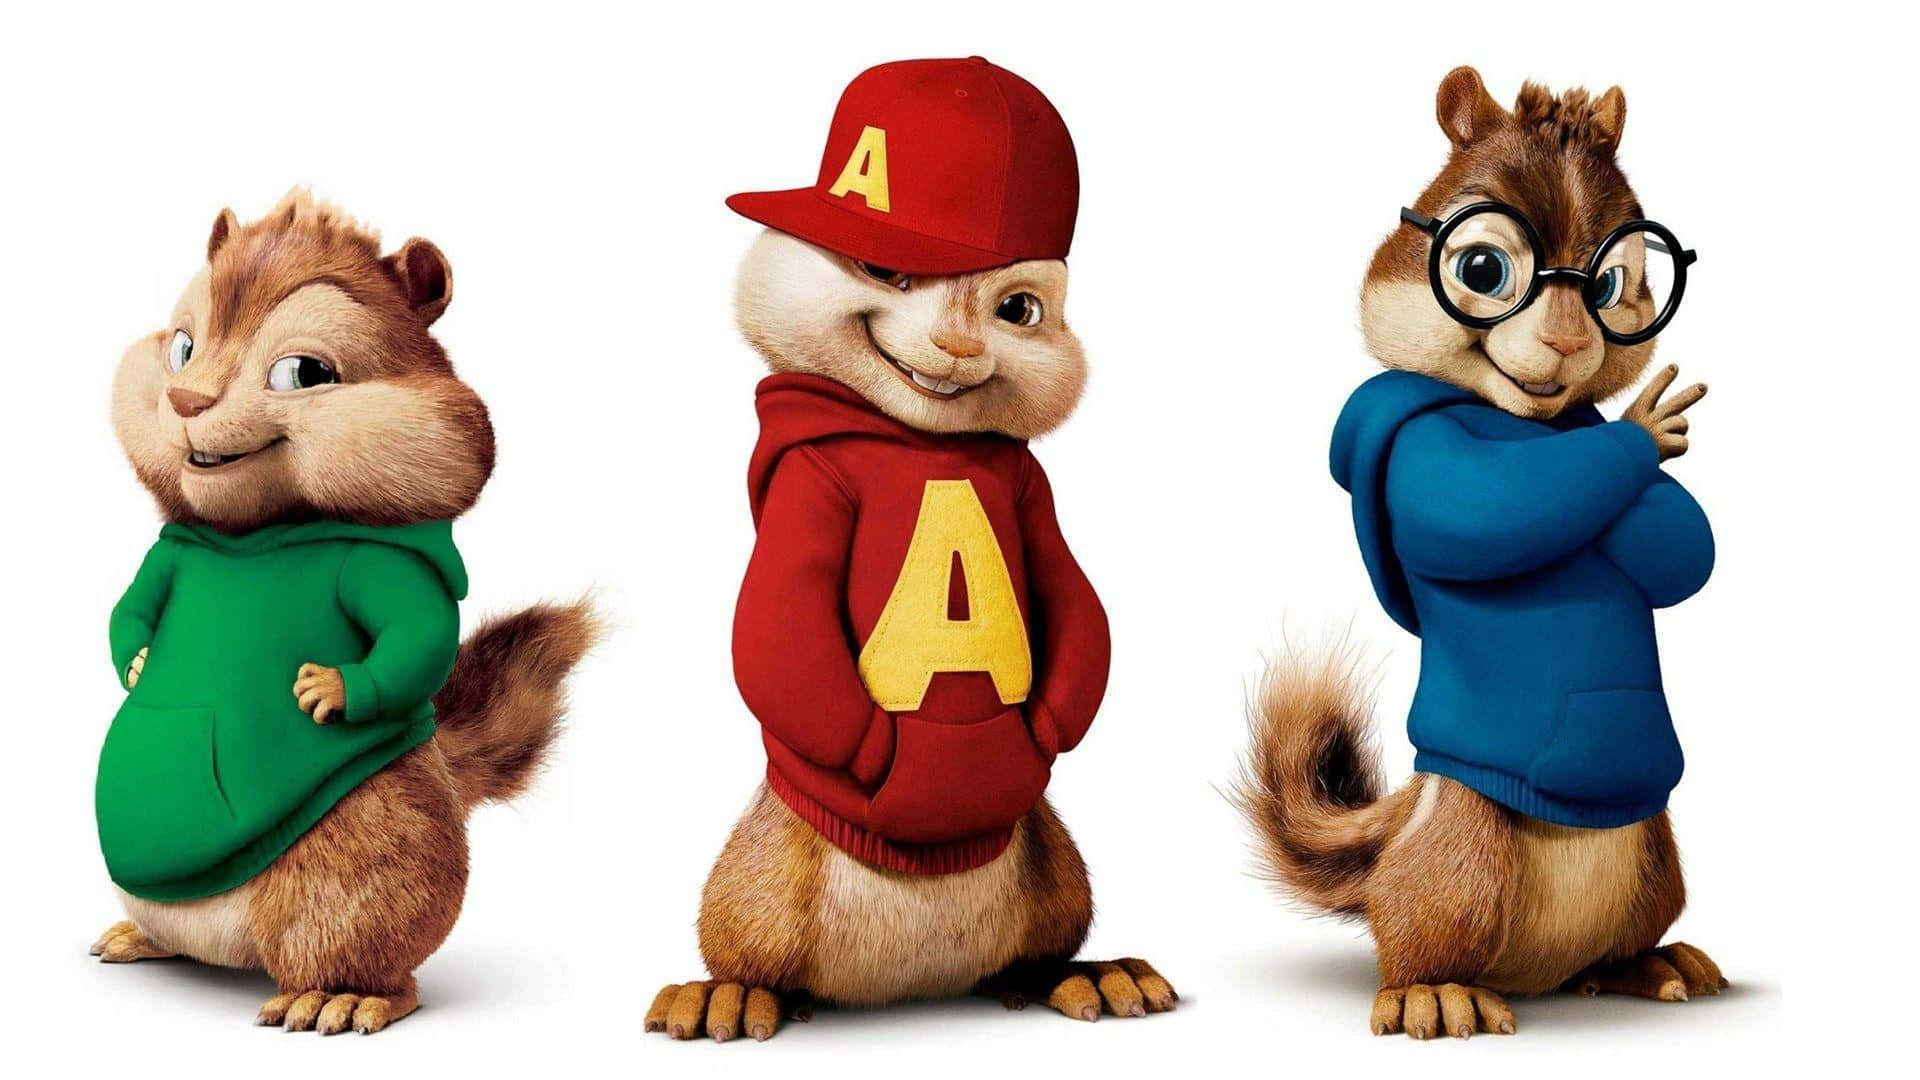 Enjoying the music of Alvin and The Chipmunks!